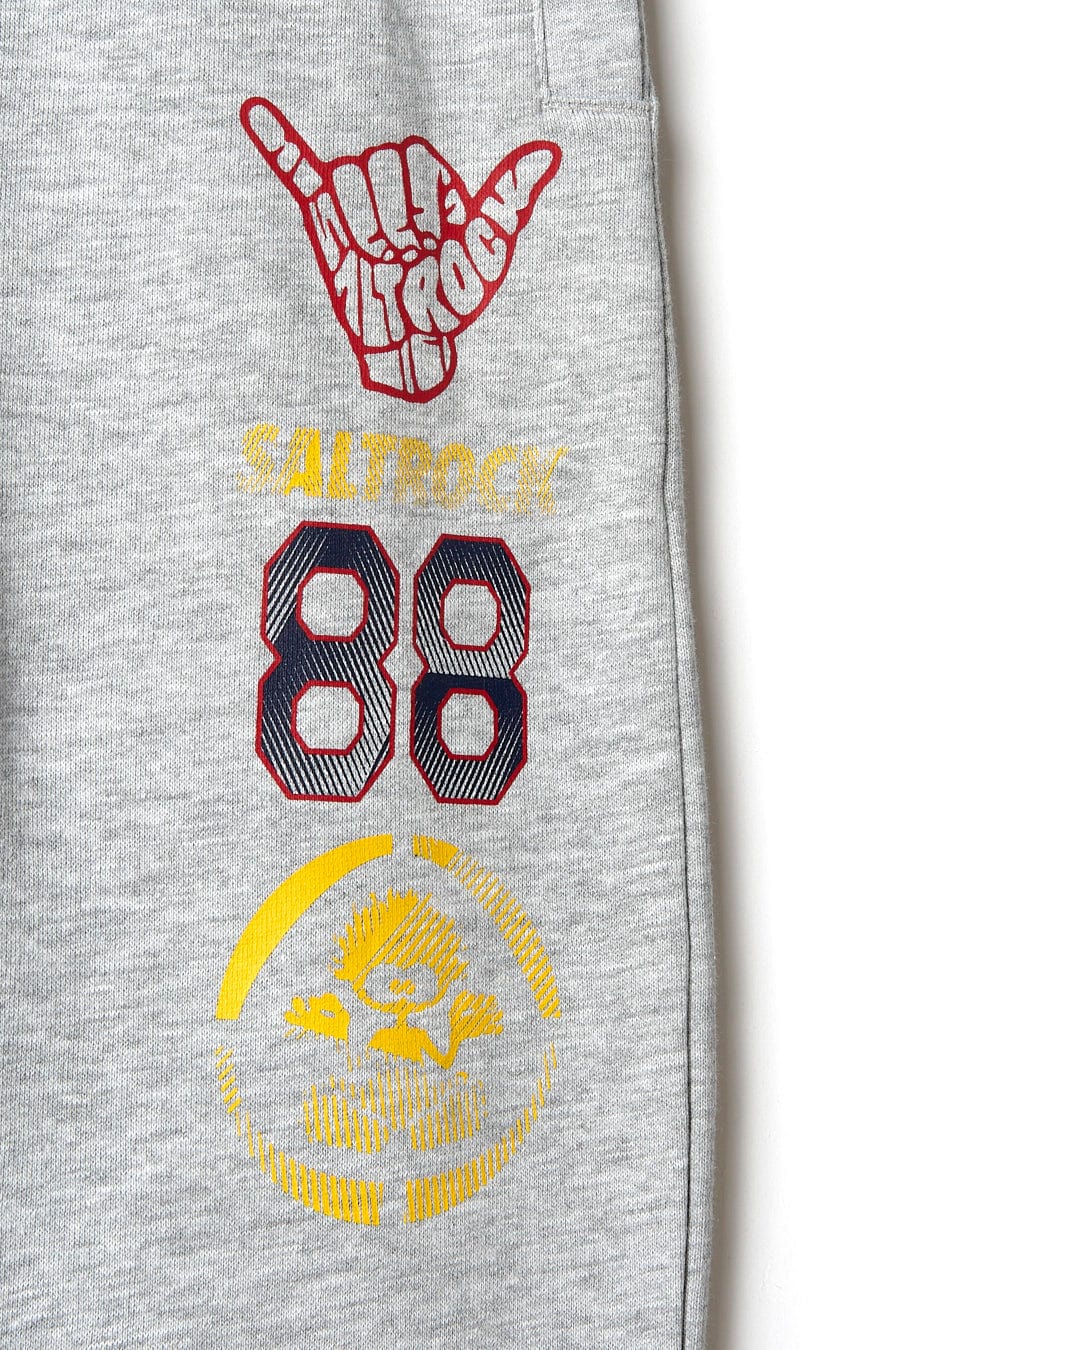 A pair of Saltrock sweatpants with the number 88 on them.